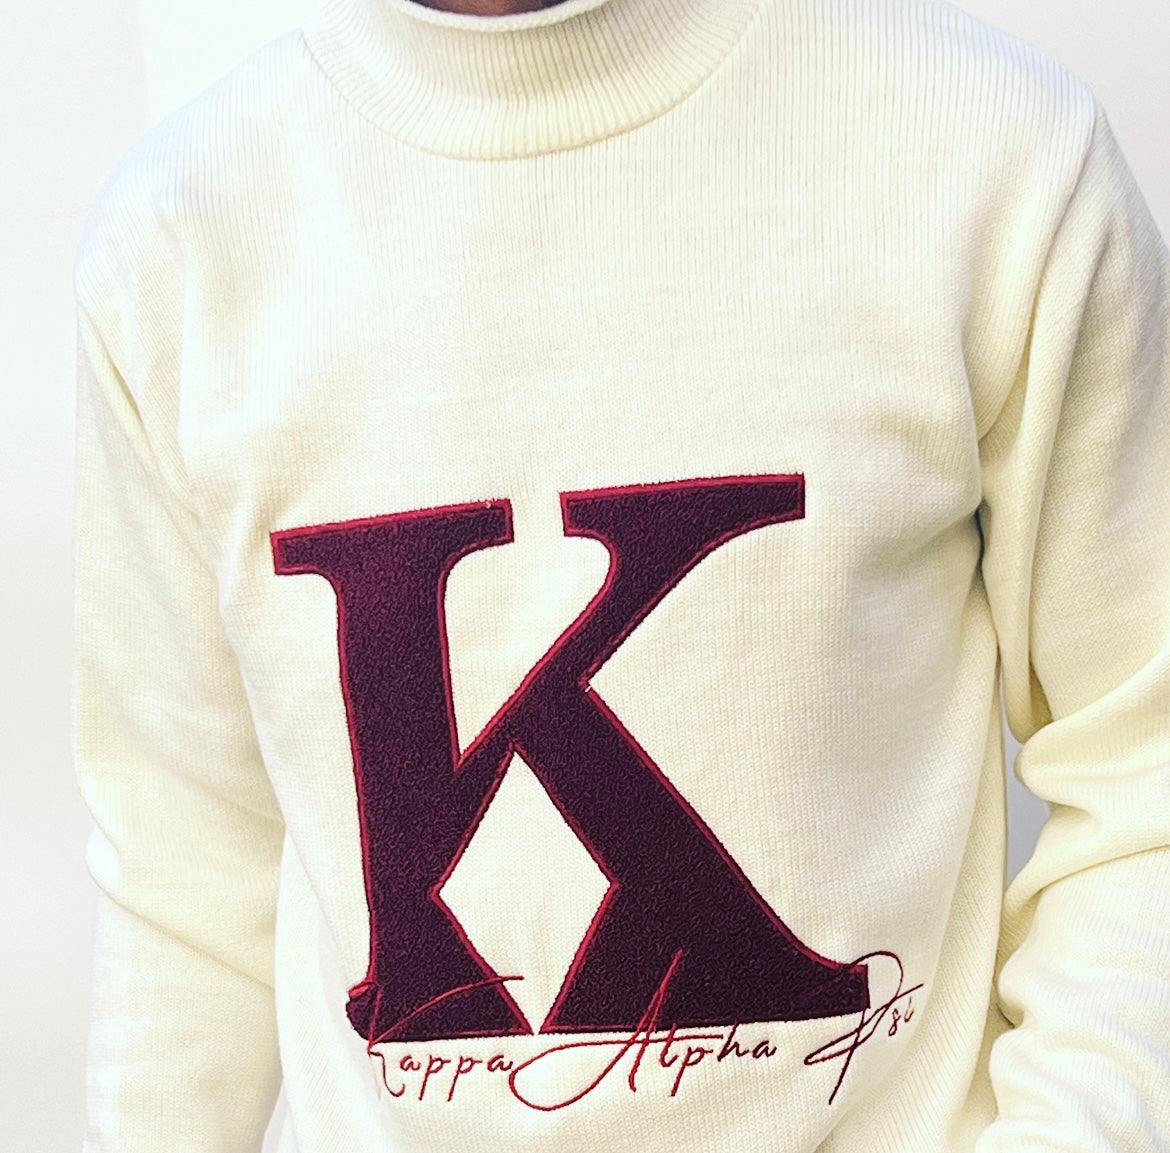 Exclusive Kappa Alpha Psi Chenille Appliqué Embroidery Crimson Sweater. This is the perfect long-sleeved Sweater to wear while showing off your Kappa Alpha Psi fraternity . A comfortable 100% Acrylic with a Chenille K diamond and Kappa Alpha Psi embroidery across the chest give you the perfect fit. This sweater is also a perfect gift for your favorite Kappa Man.